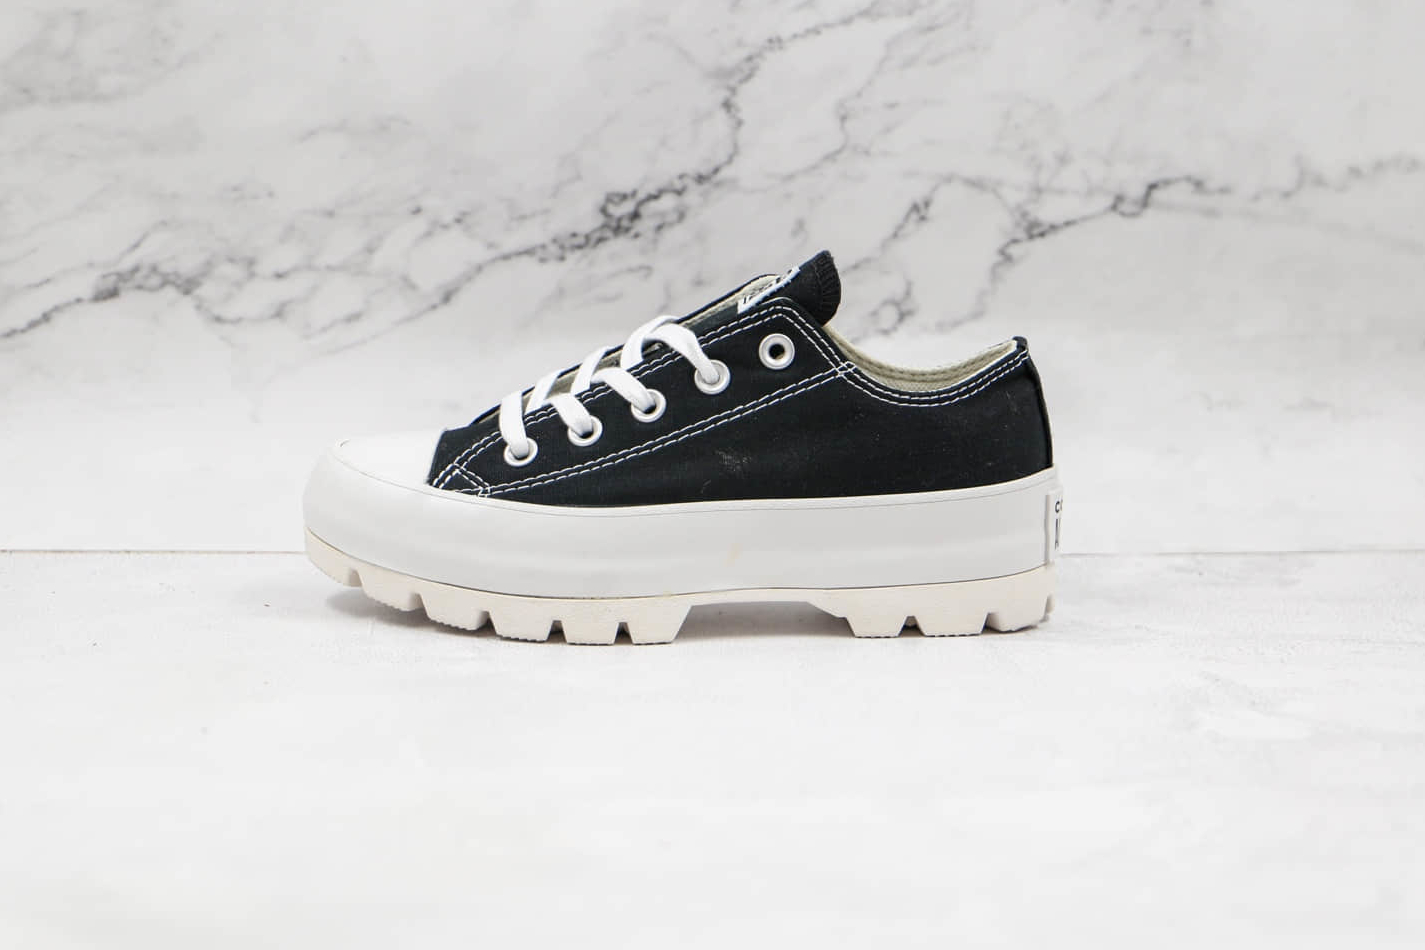 Converse Chuck Taylor All Star Lugged Low 'Black White' 567681C - Stylish Women's Shoes with Traction